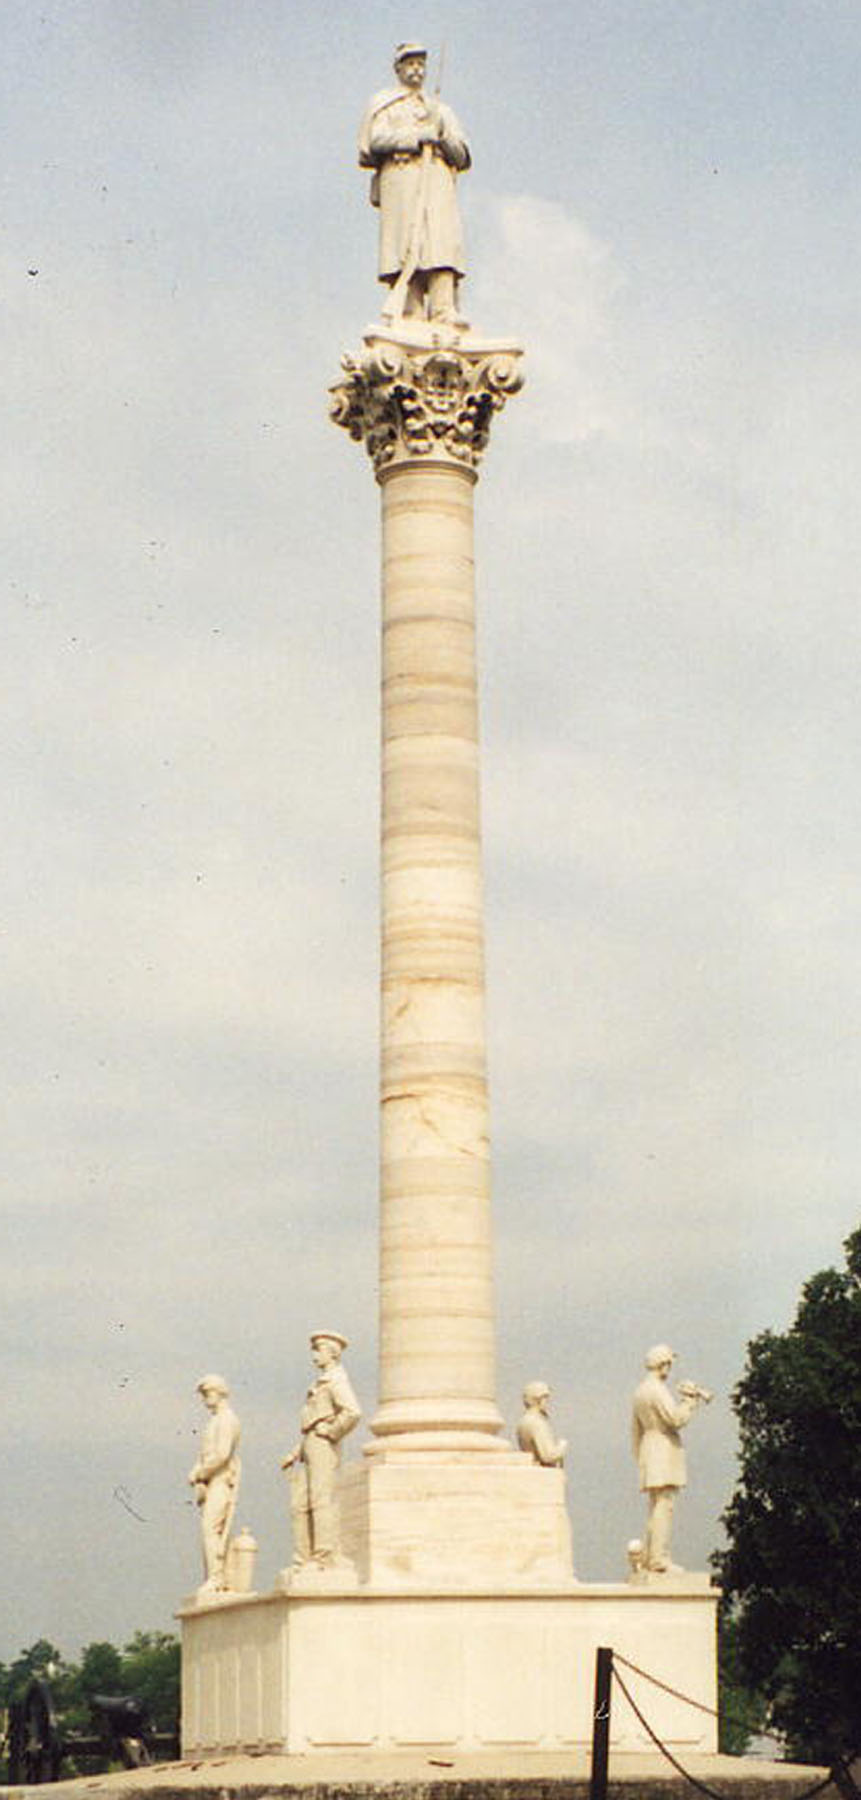 Photo of a tall white marble monument with four small male figures at each corner of the square base. A larger male figure stands at the top of the pillar.